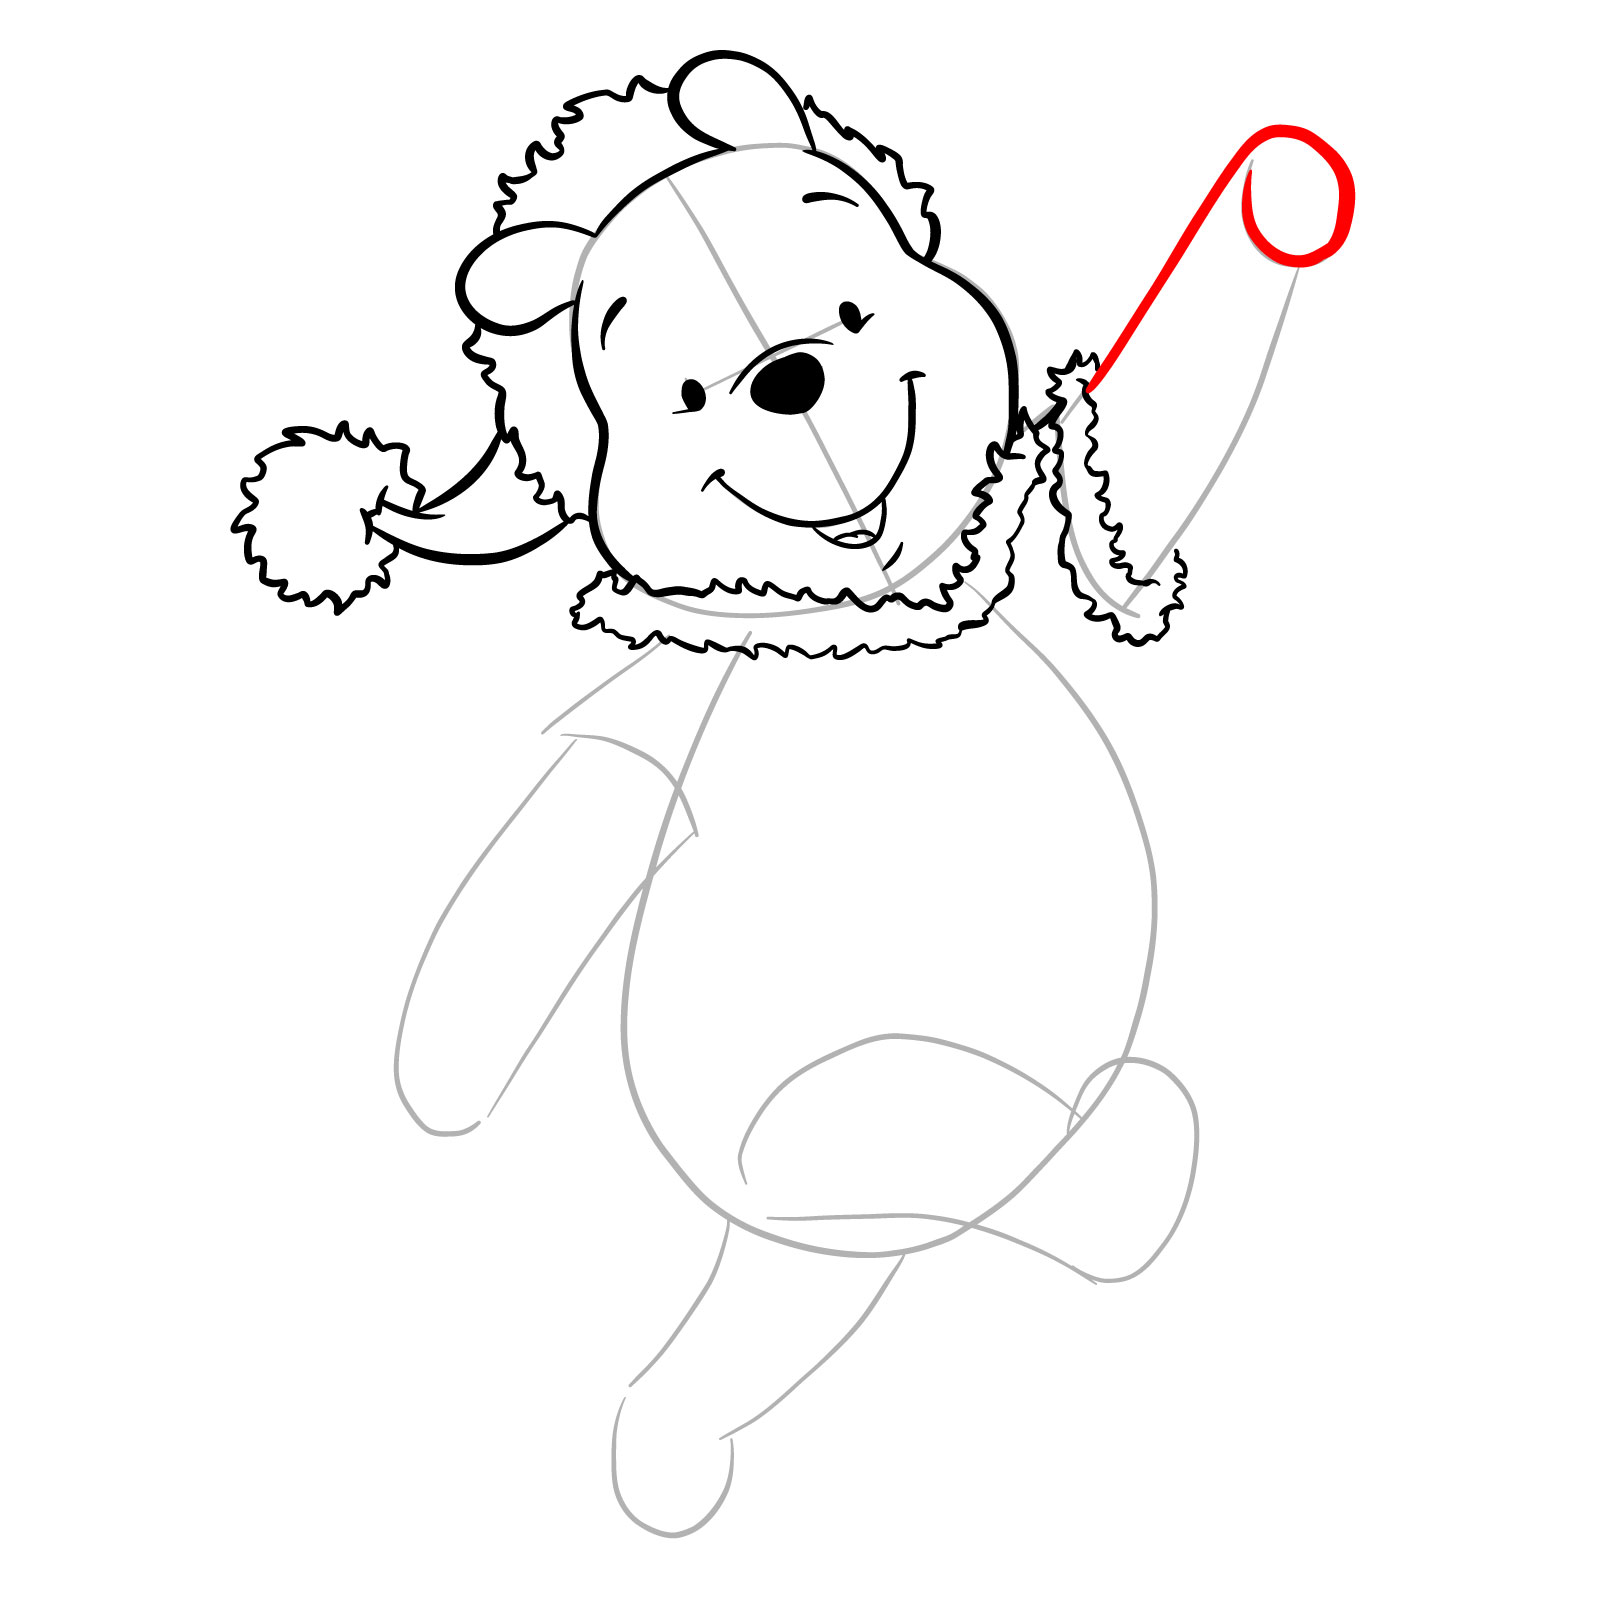 How to draw Winnie-the-Pooh Christmas style - step 17